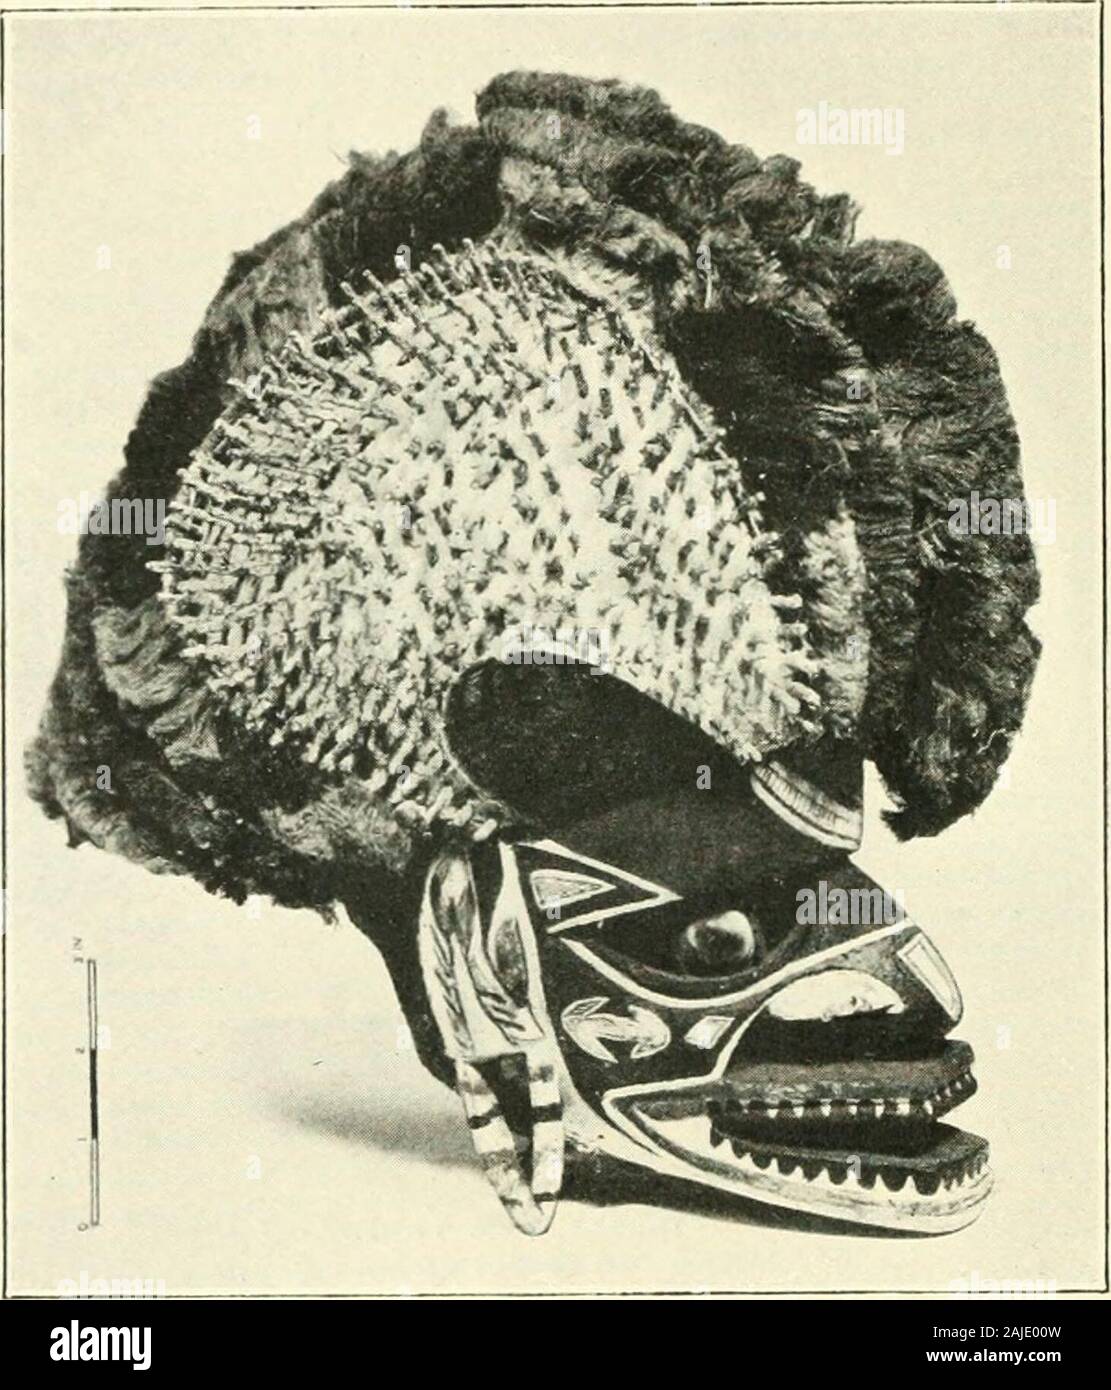 Handbook to the ethnographical collections . com-. Yia. 34.—Ceremoniiil mask from New Ireland. nnuiicate with spirits by theinselves, the tendency to compli-cate the means necessary to this end soon led to the growth ofa professional class of mediators. These men are the so-called shamans, medicine-men, or witch-doctors, who existamong all primitive ti-ibes. Fasting and hardship had earlyacquainted primitive man with trance, and with thosedelirious states in which subconscious ideas come to thesurface. What more natural then than that the strange andaltered tones, the voice low and out of the Stock Photo